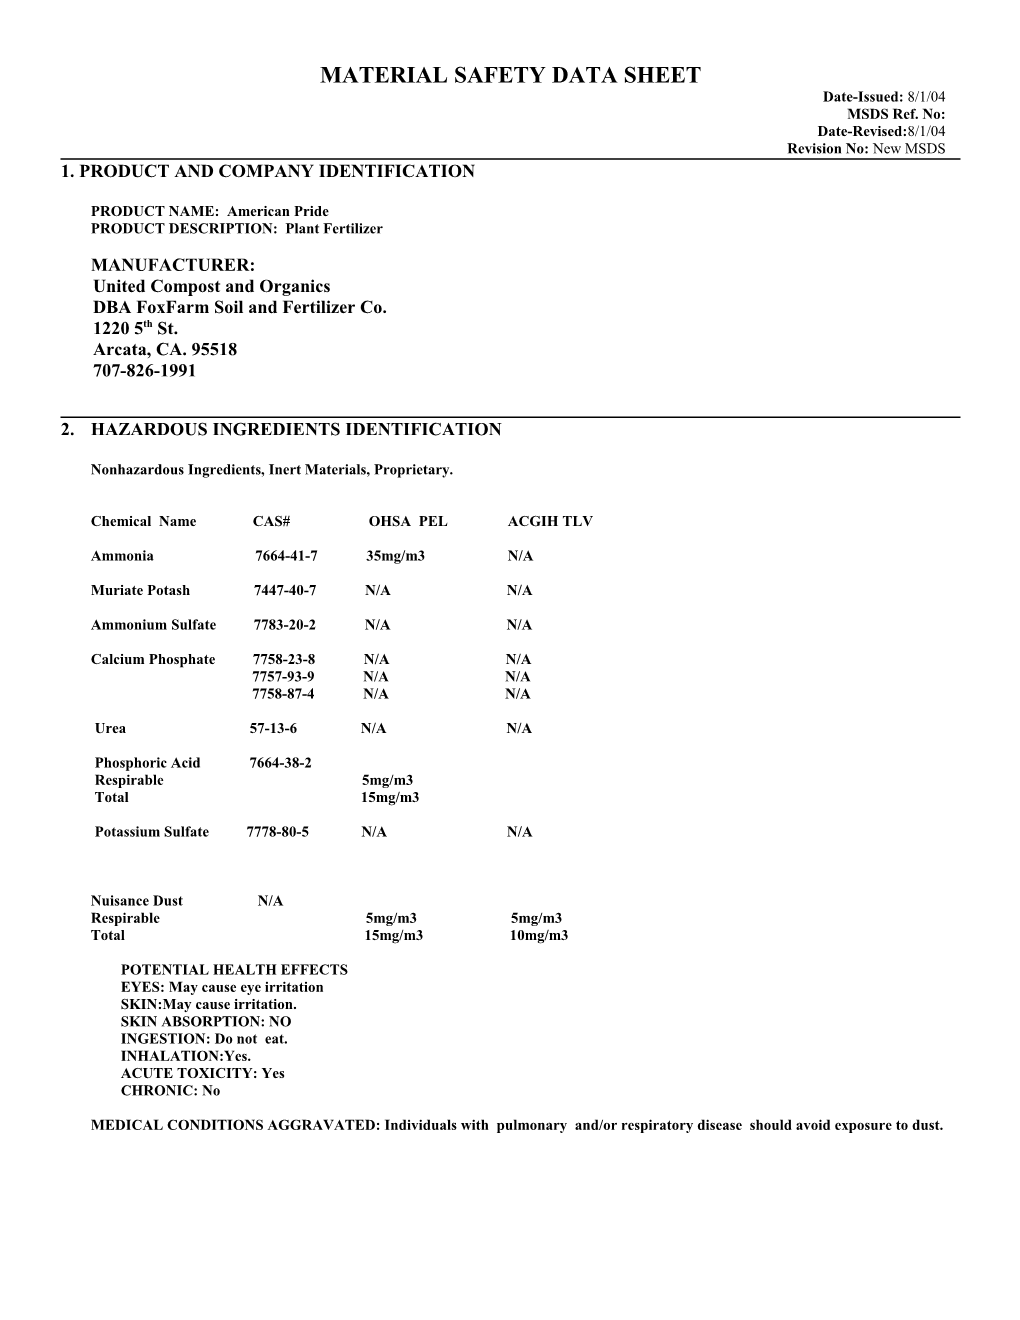 Material Safety Data Sheet s63